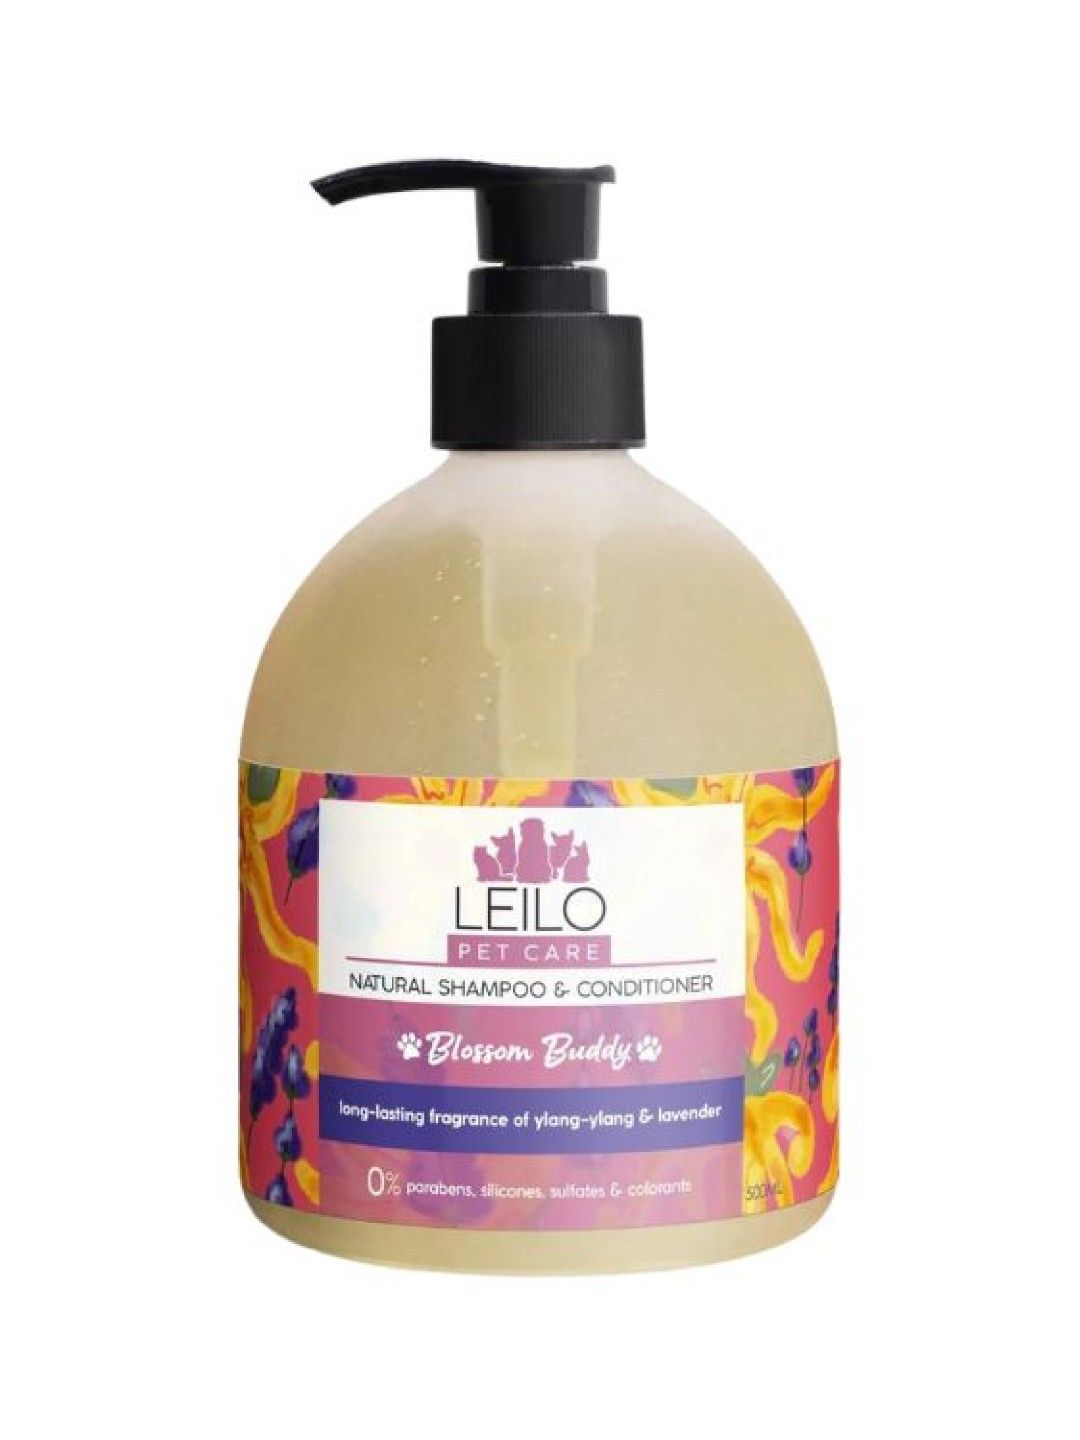 Leilo Natural 2-in-1 Pet Shampoo & Conditioner in Blossom Buddy (500ml)